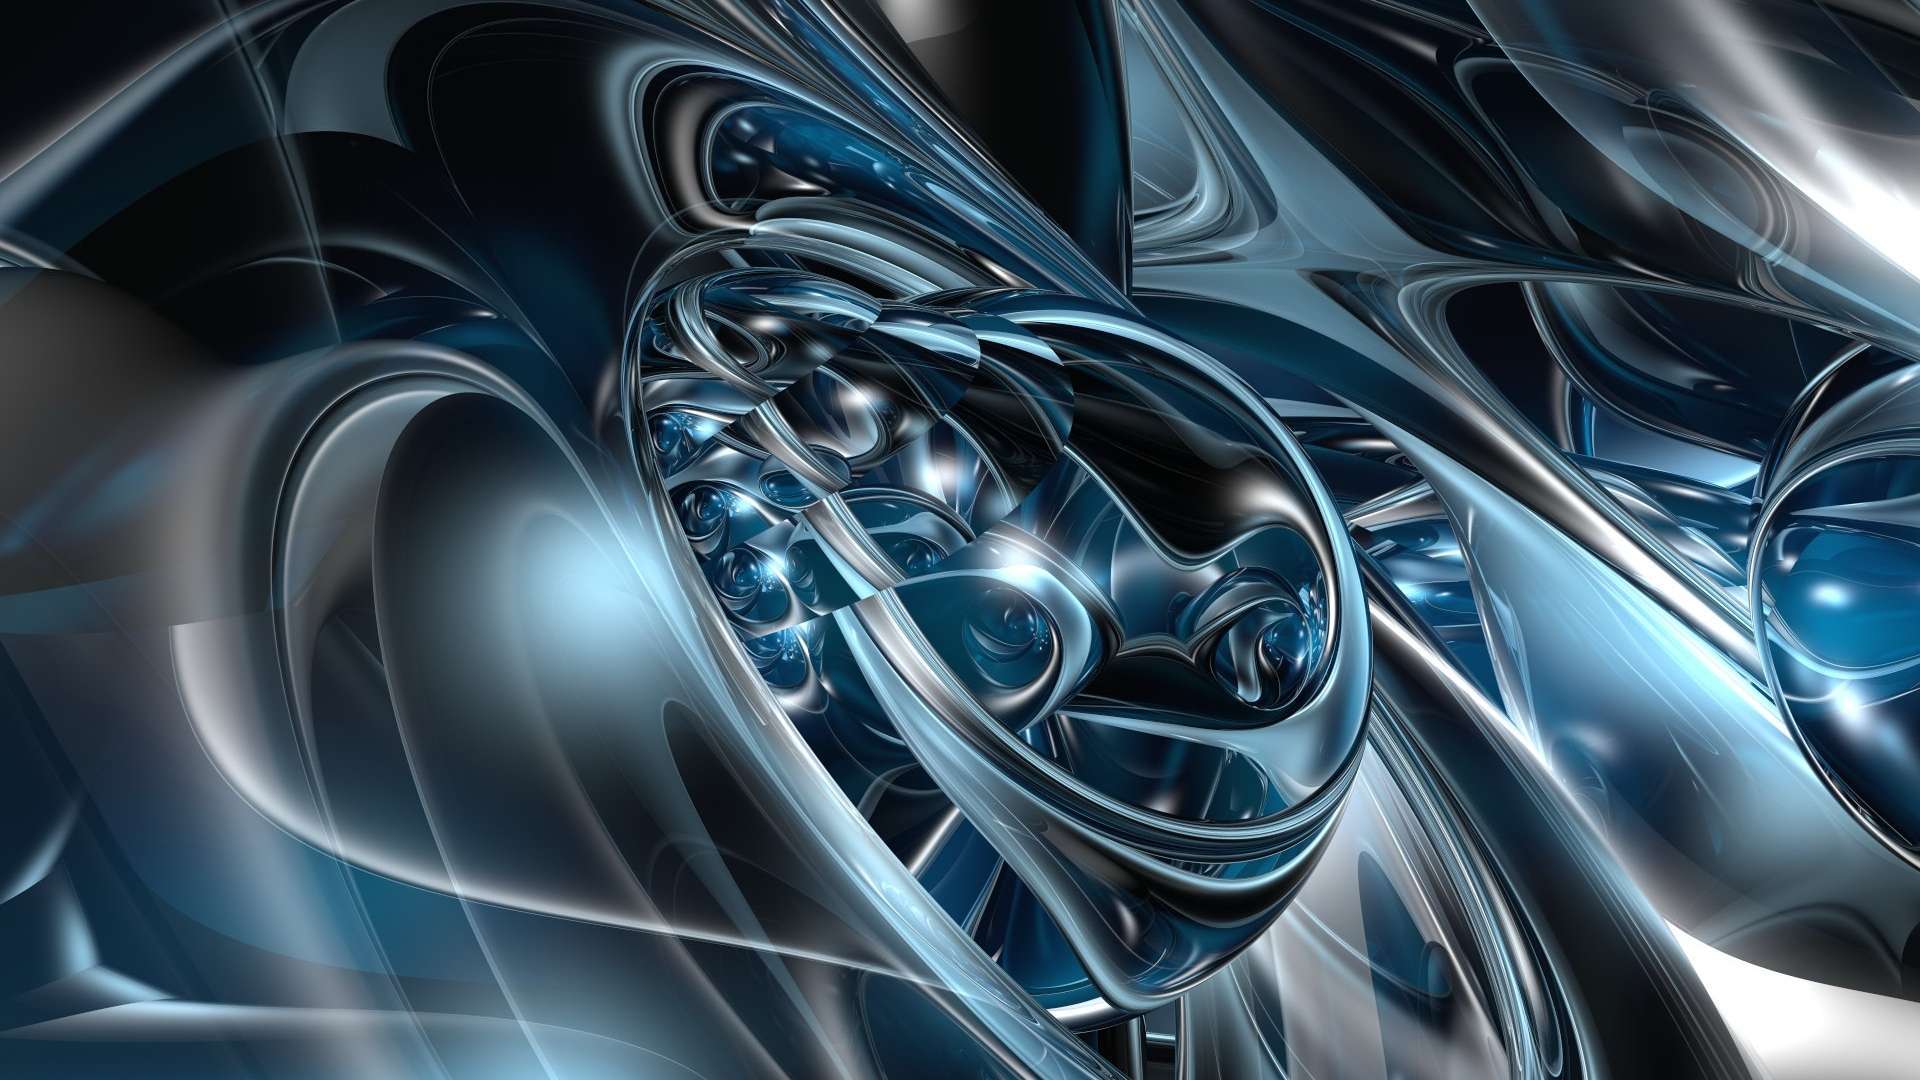 Download wallpaper 1366x768 3d, abstract, fractal tablet, laptop hd  background